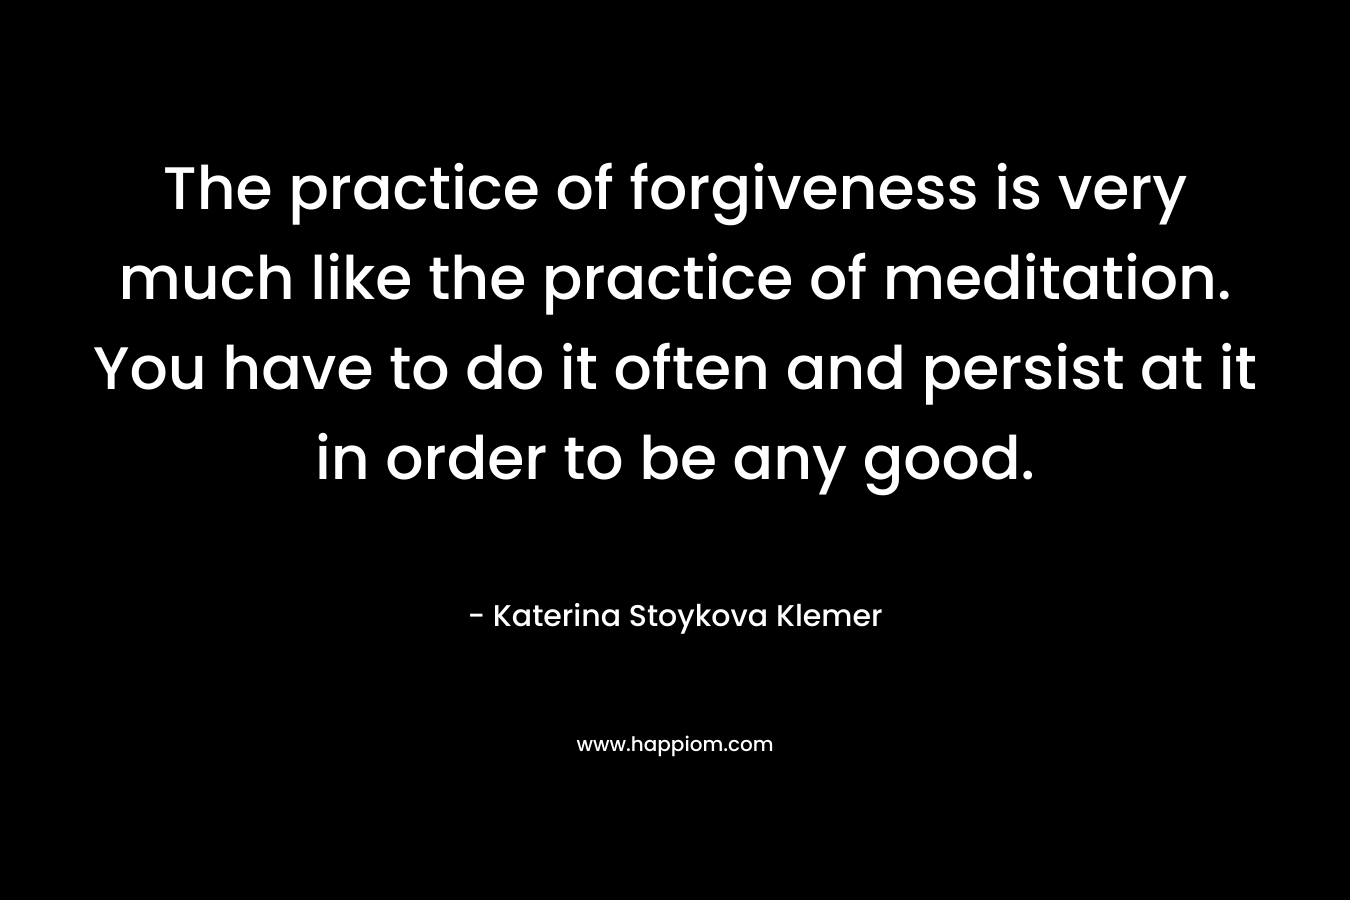 The practice of forgiveness is very much like the practice of meditation. You have to do it often and persist at it in order to be any good.